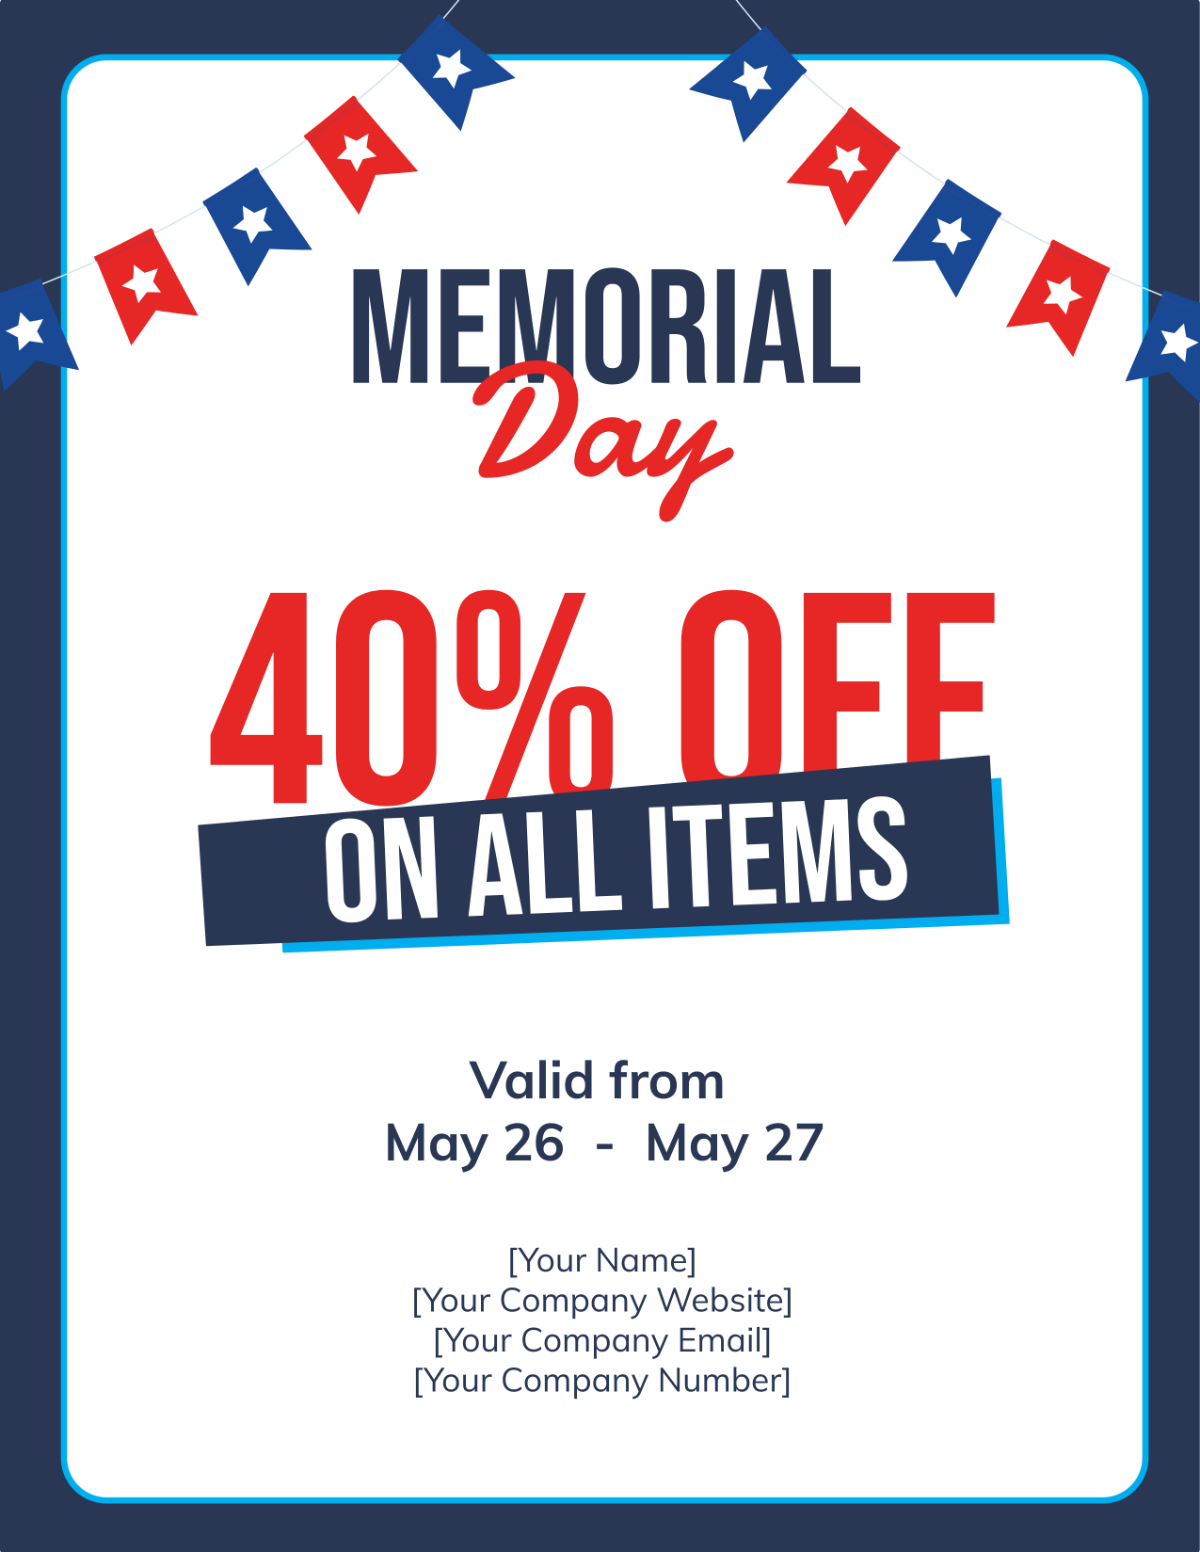 Free Memorial Day Discount Flyer Template